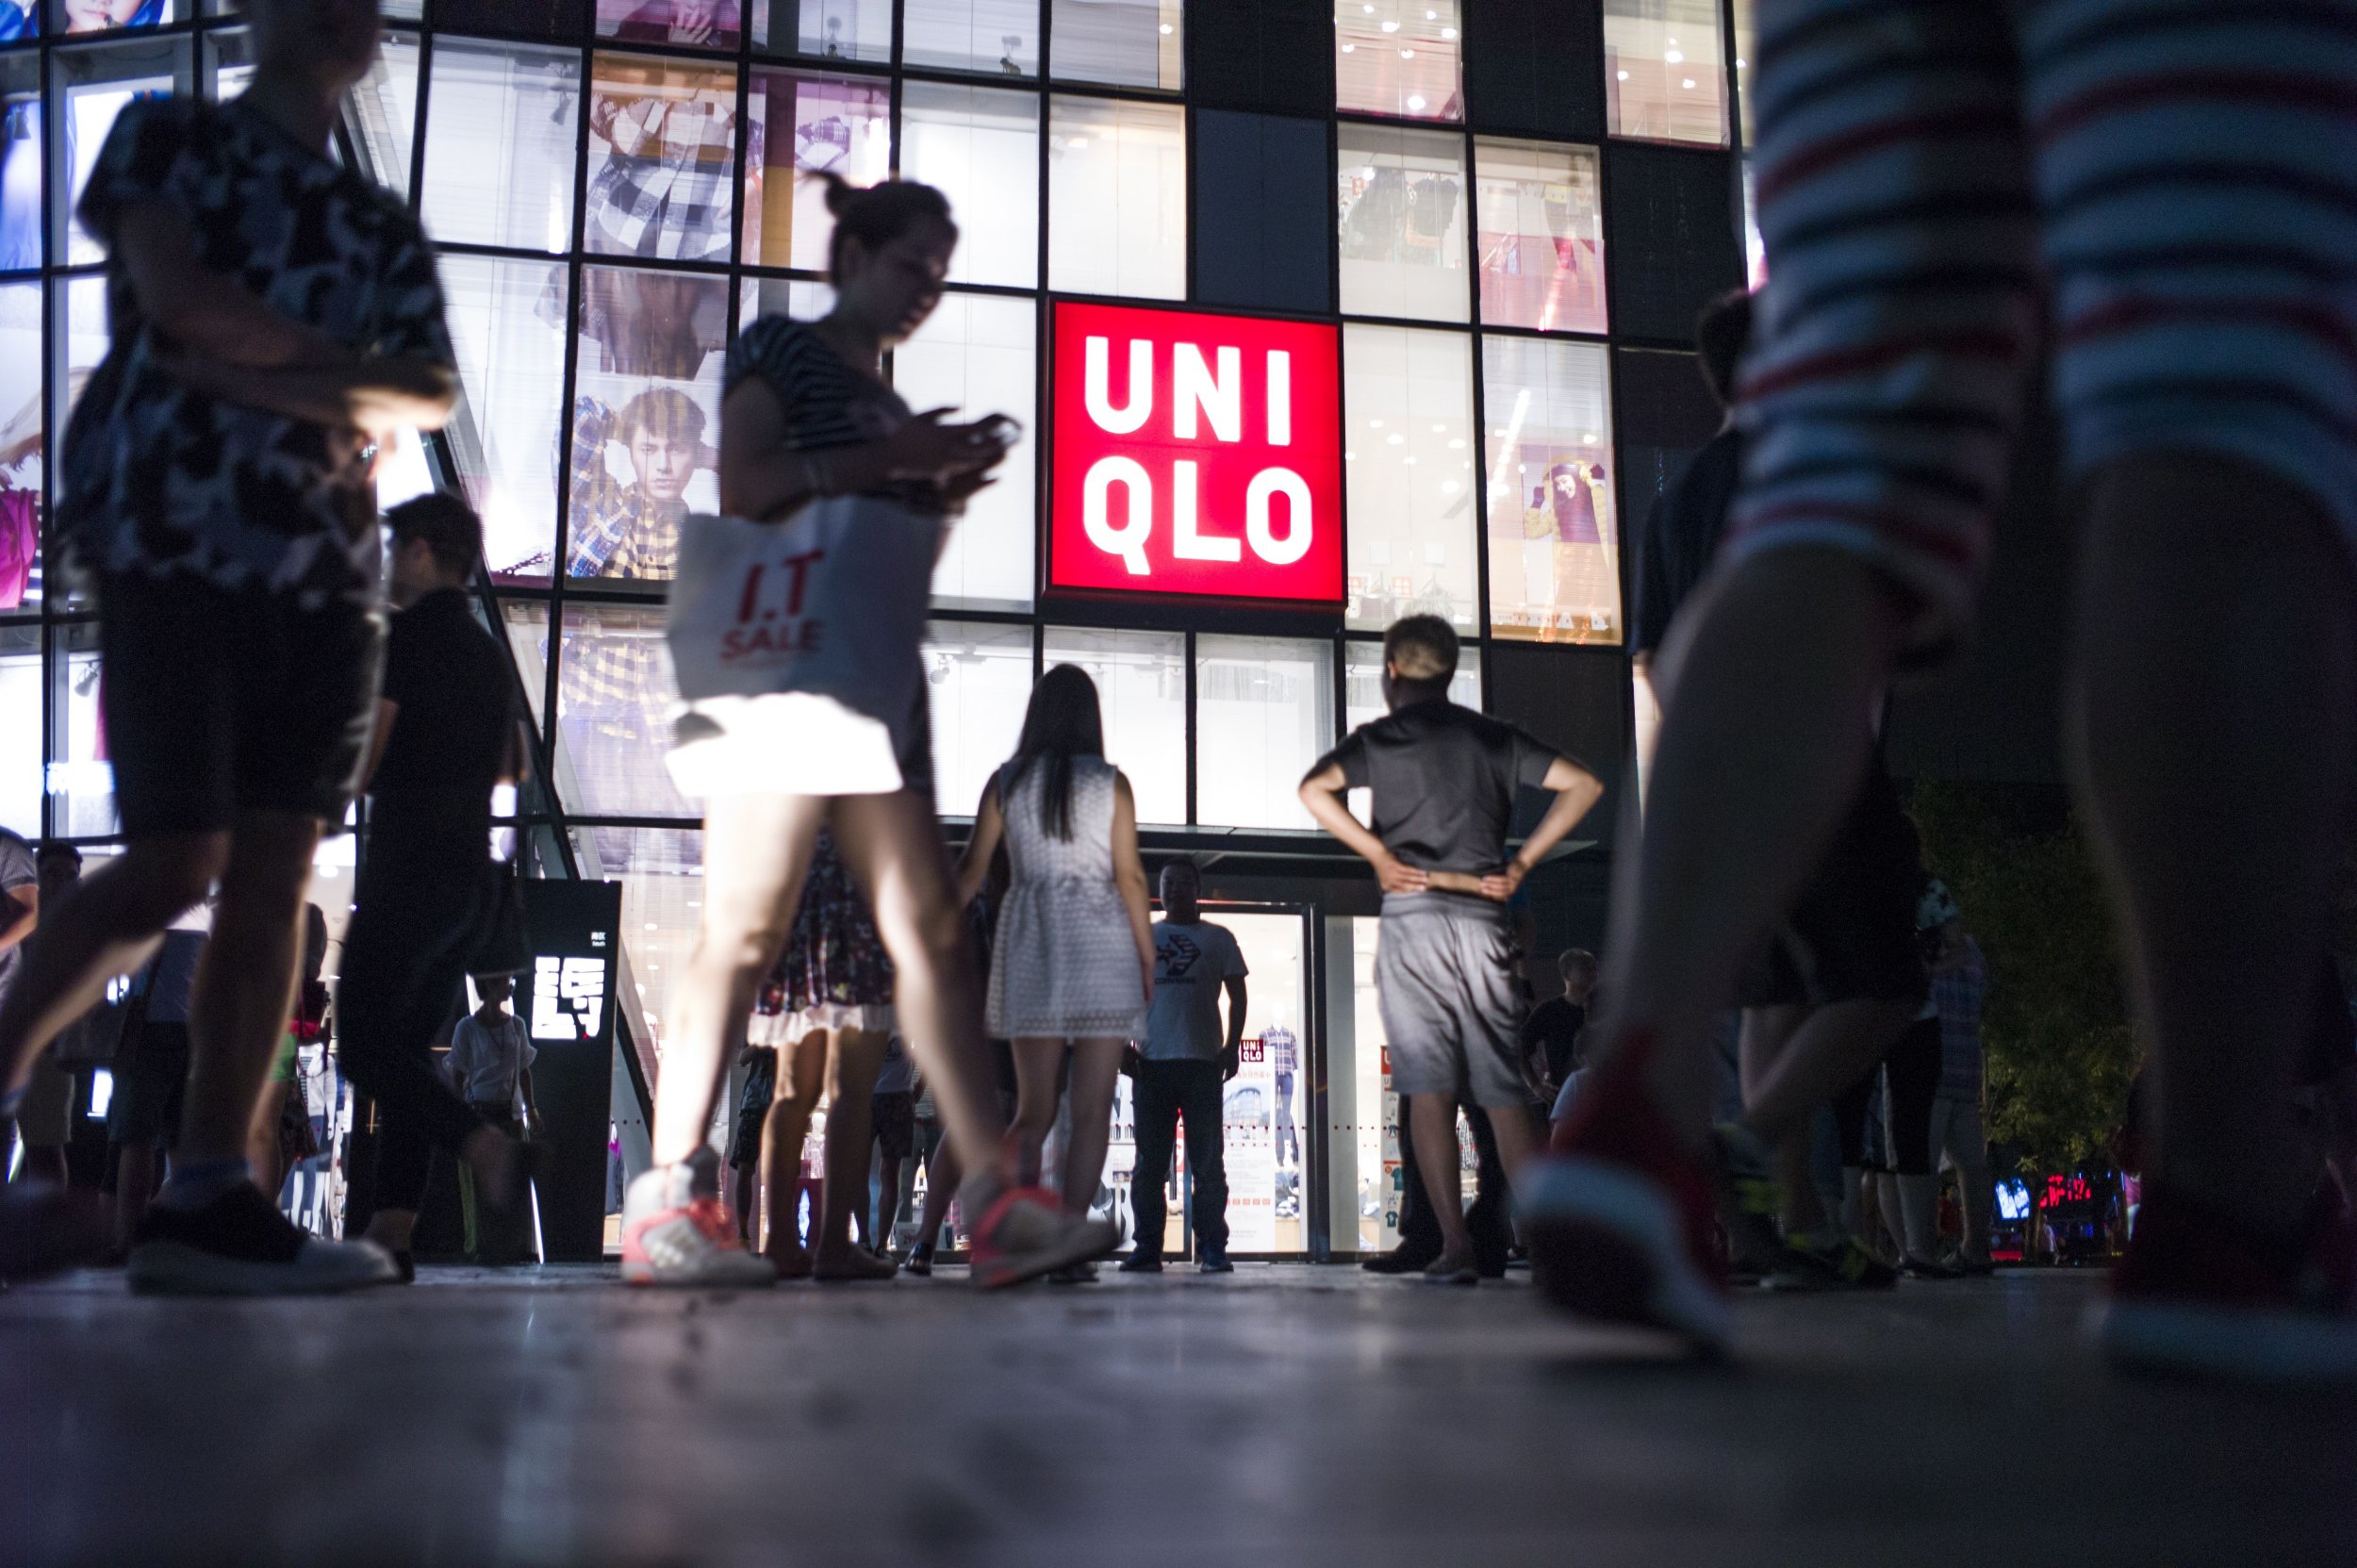 Uniqlo Store Sex Video Fallout China Orders Removal Of Amateur Porn From Social Media IBTimes photo